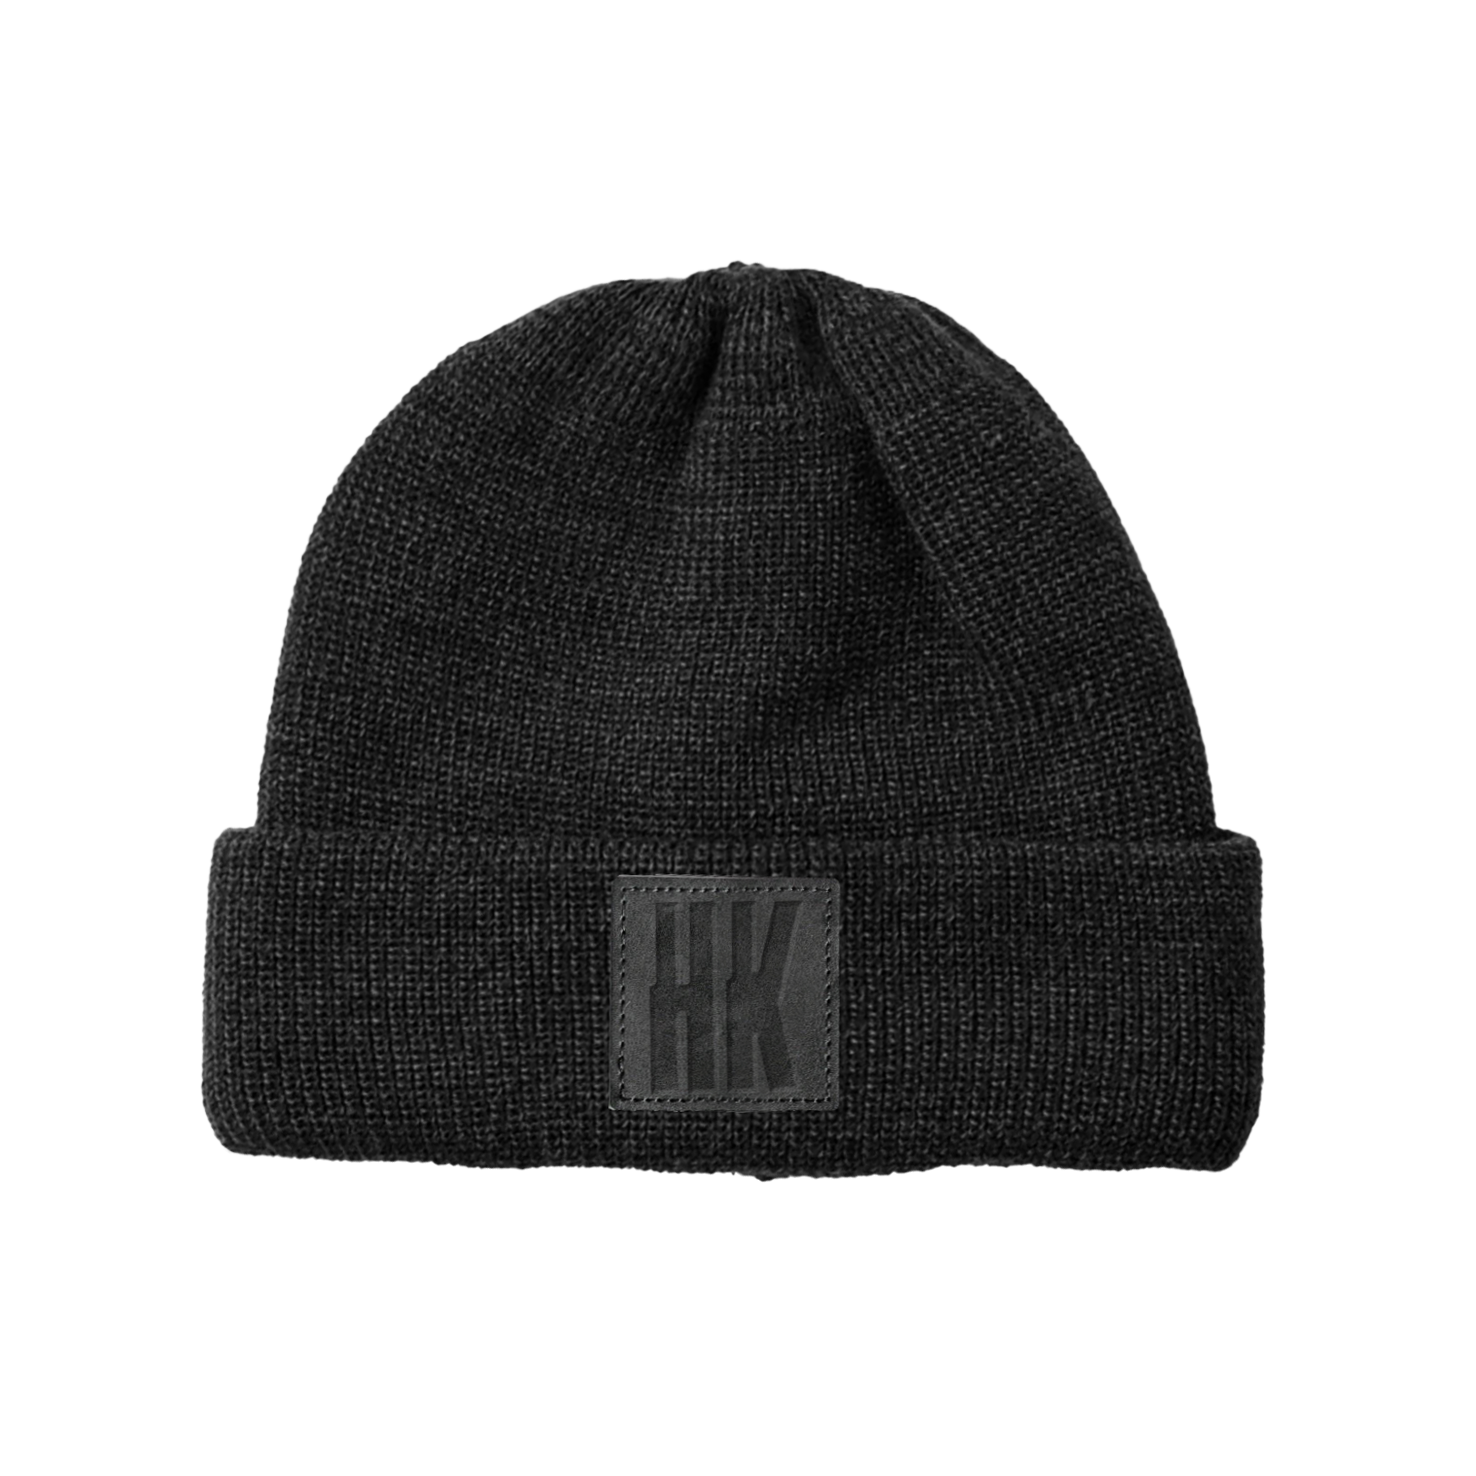 HELL'S KITCHEN Patch Beanie Image